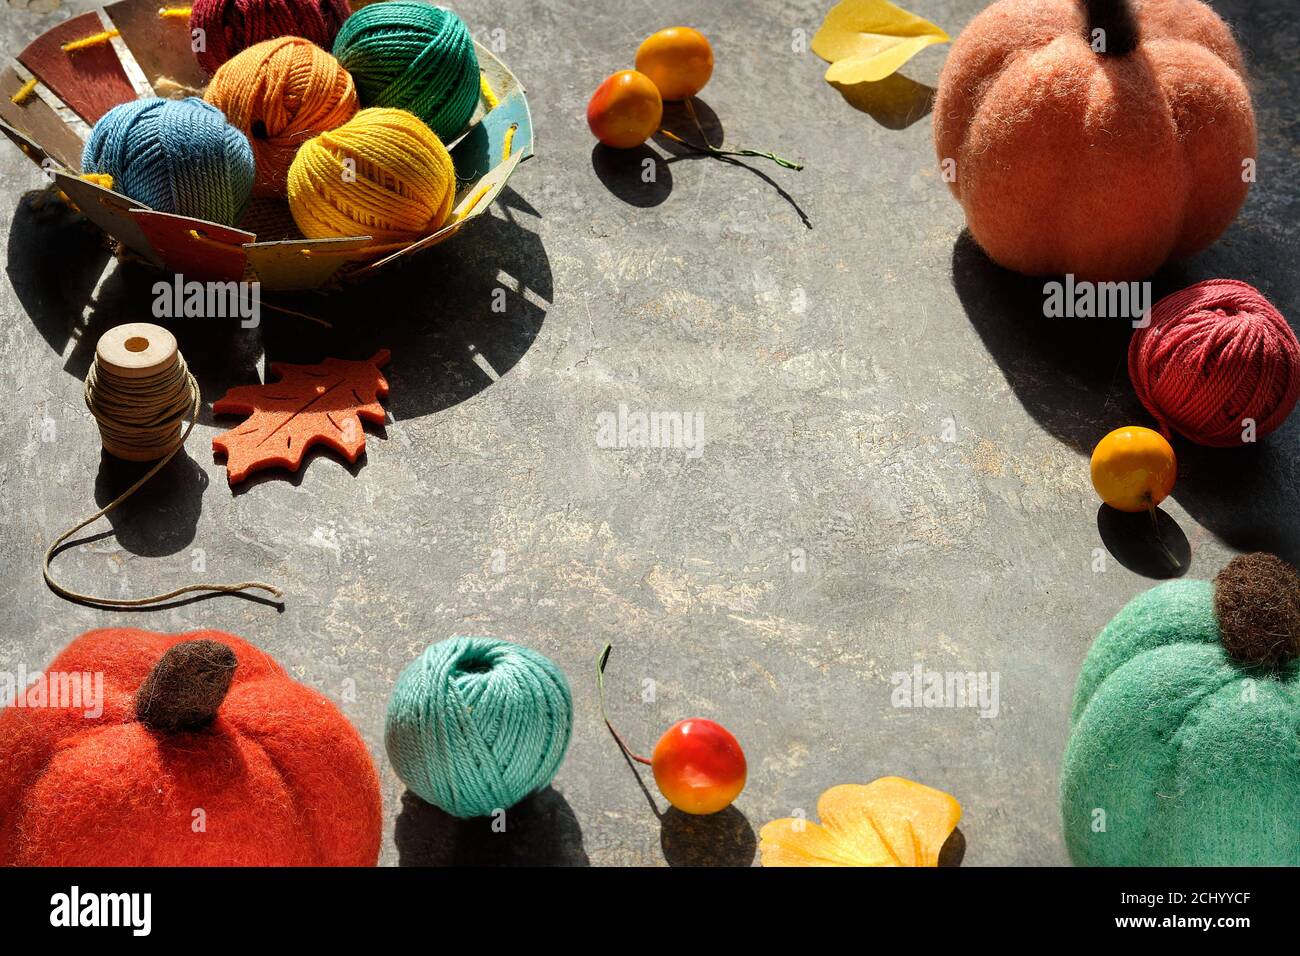 Creative arrangement of craft materials for knitting and crochet with copy-space. Dark table with yarn balls, felt pumpkins, Fall leaves and berry. Stock Photo